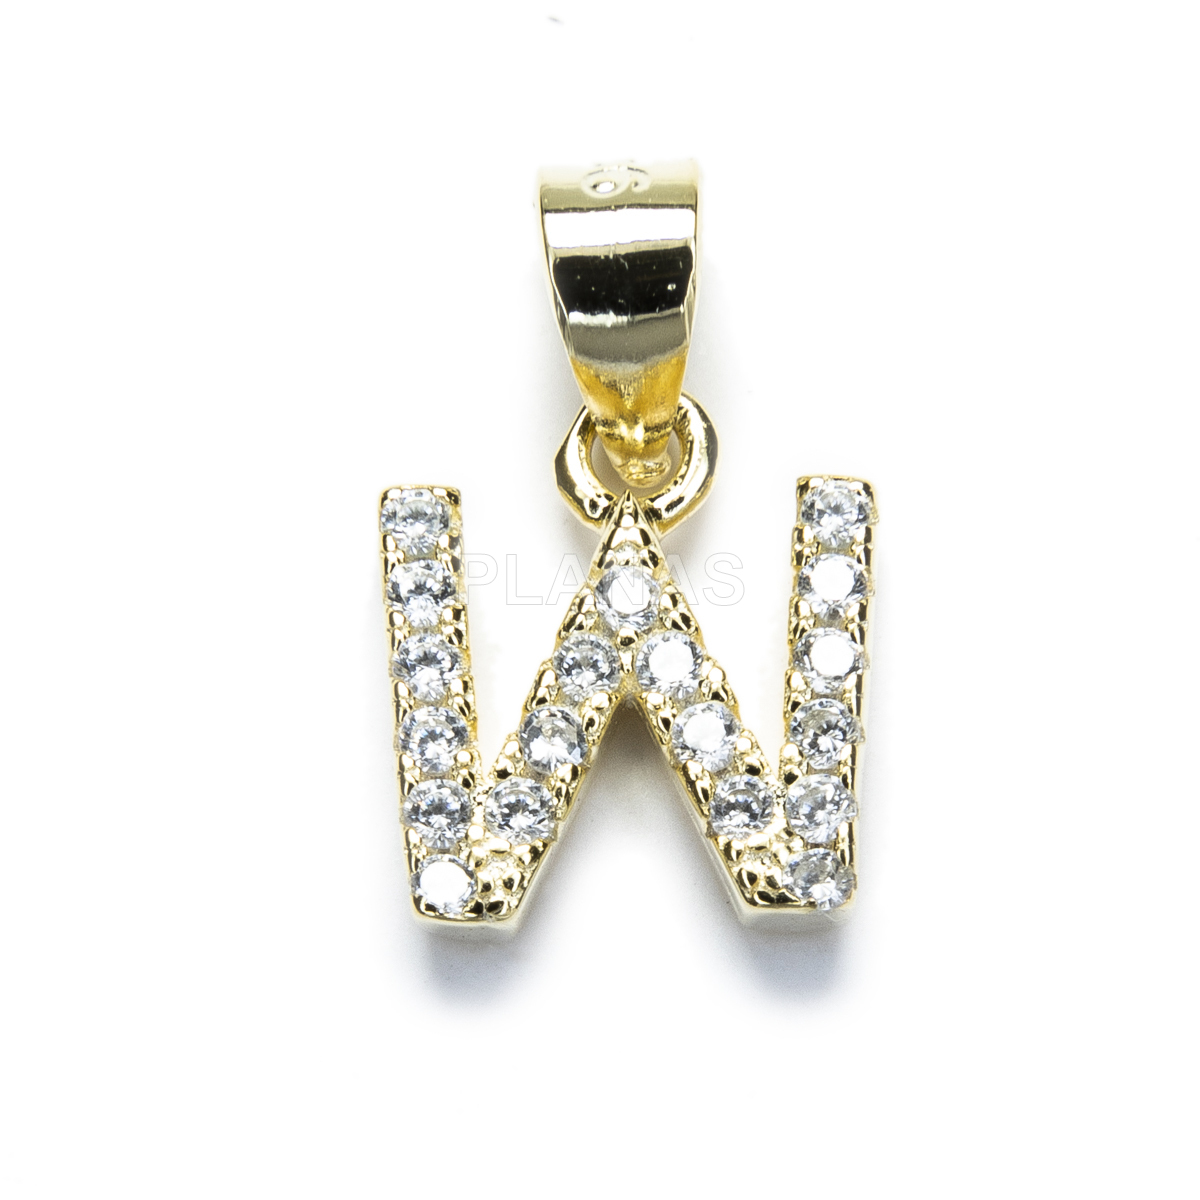 Letters pendant in sterling silver and gold plated with white zircons.